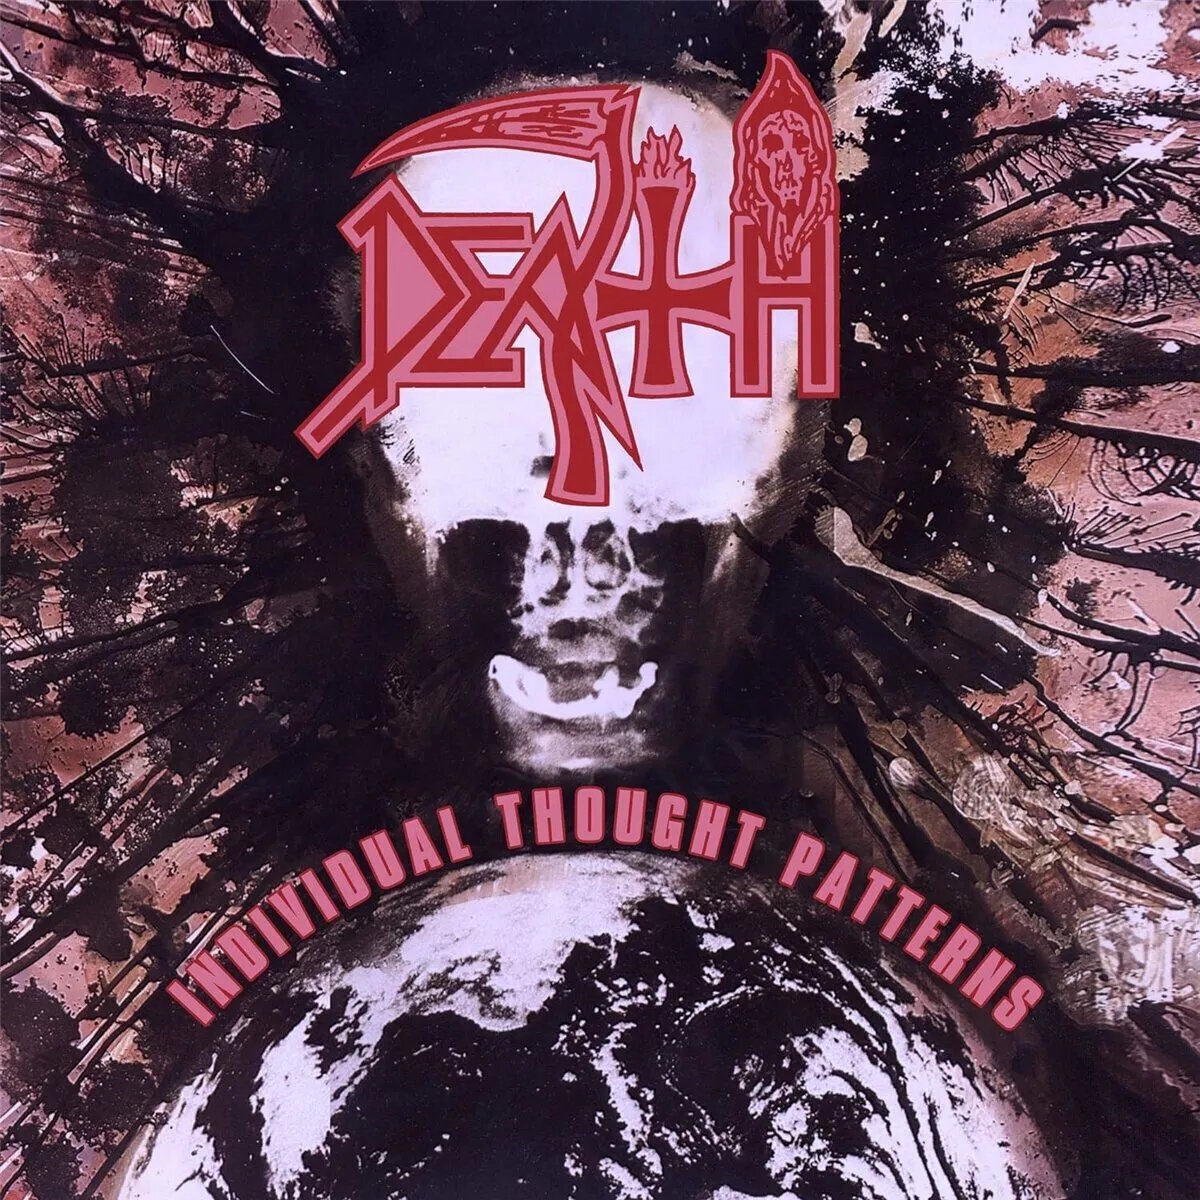 Disco de vinil Death - Individual Thought Patterns (Tri Colour Merge Splatter Coloured) (Deluxe Edition) (Limited Edition) (Reissue) (Remastered) (LP)